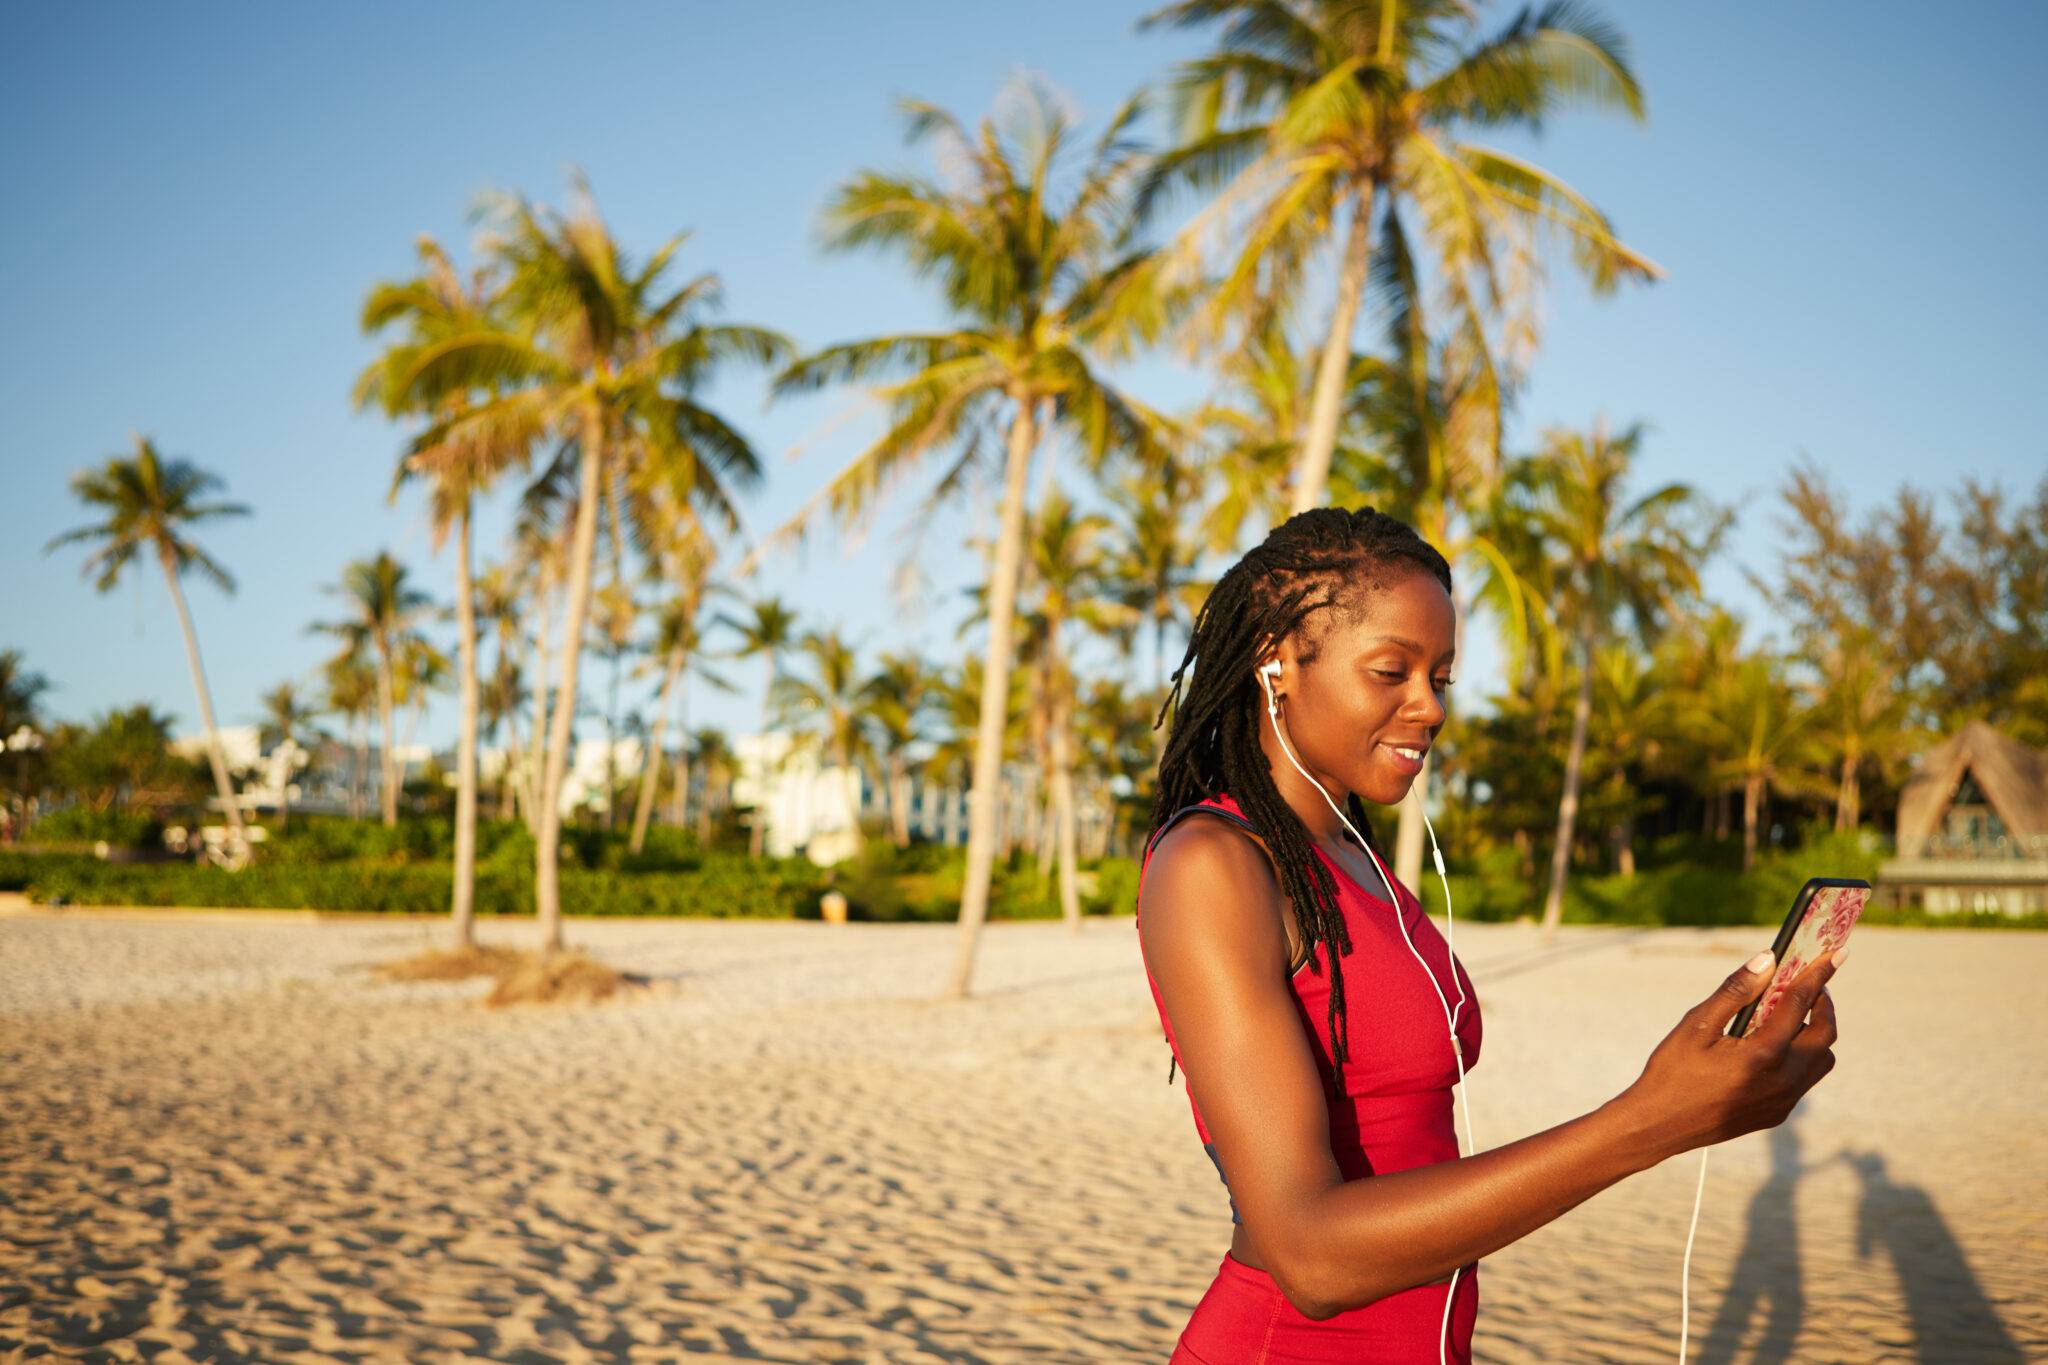 woman on the beach with headphones on and palm tress in the background